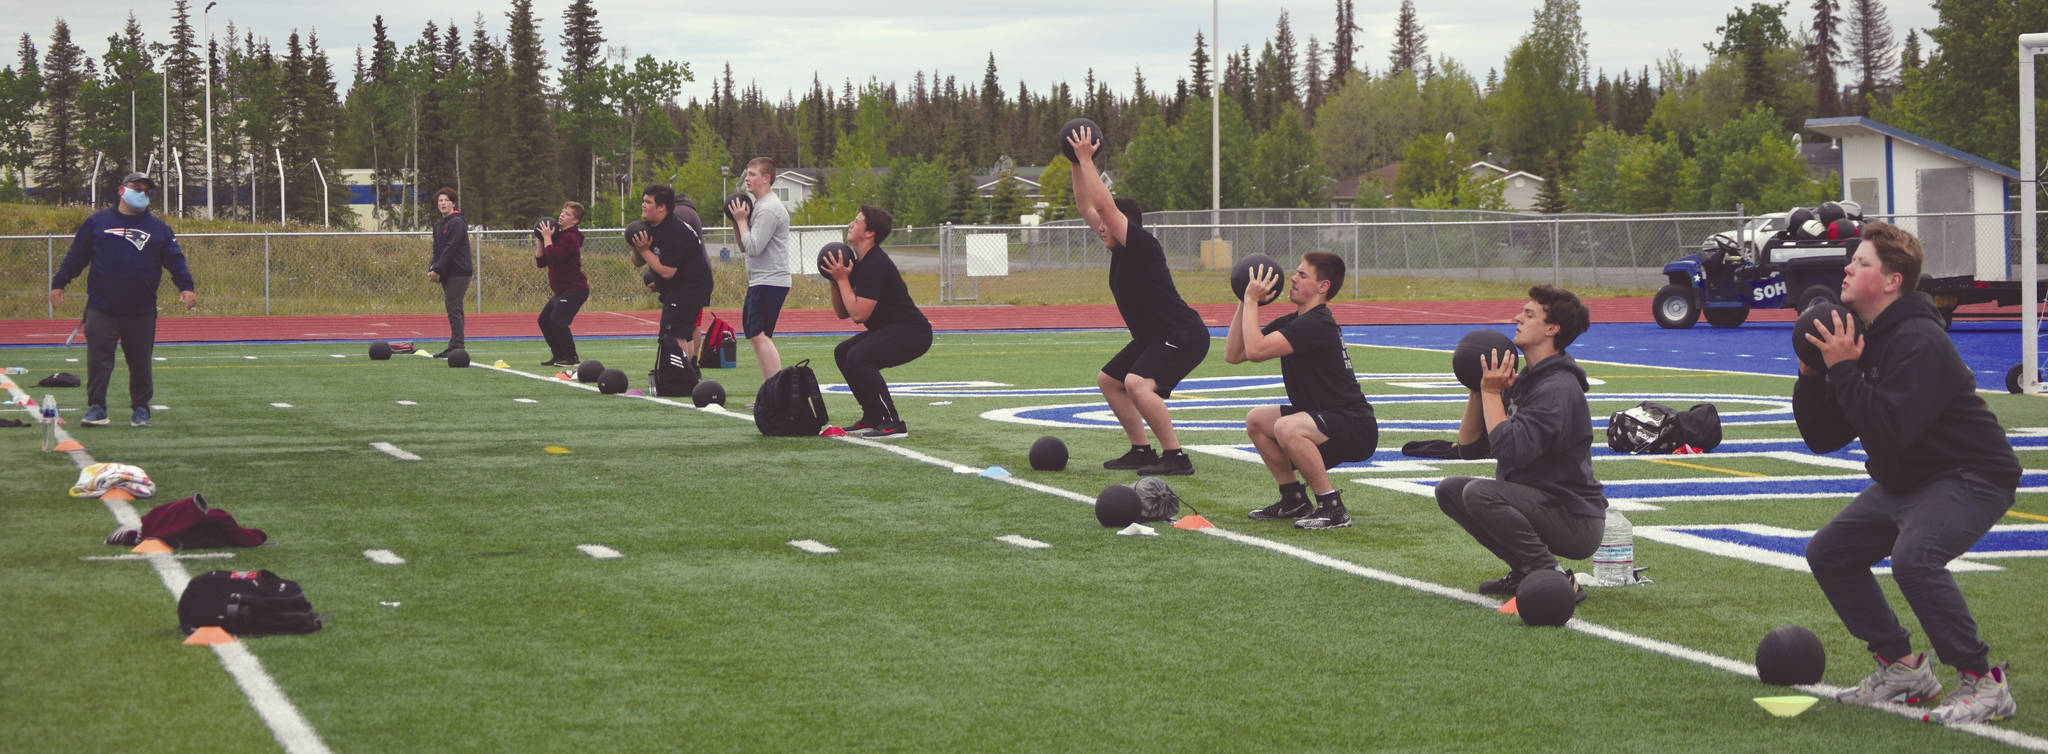 Soldotna assistant football coach Eric Pomerleau leads players through strength and mobility drills Wednesday, June 17, 2020, at Justin Maile Field at Soldotna High School in Soldotna, Alaska. (Photo by Jeff Helminiak/Peninsula Clarion)